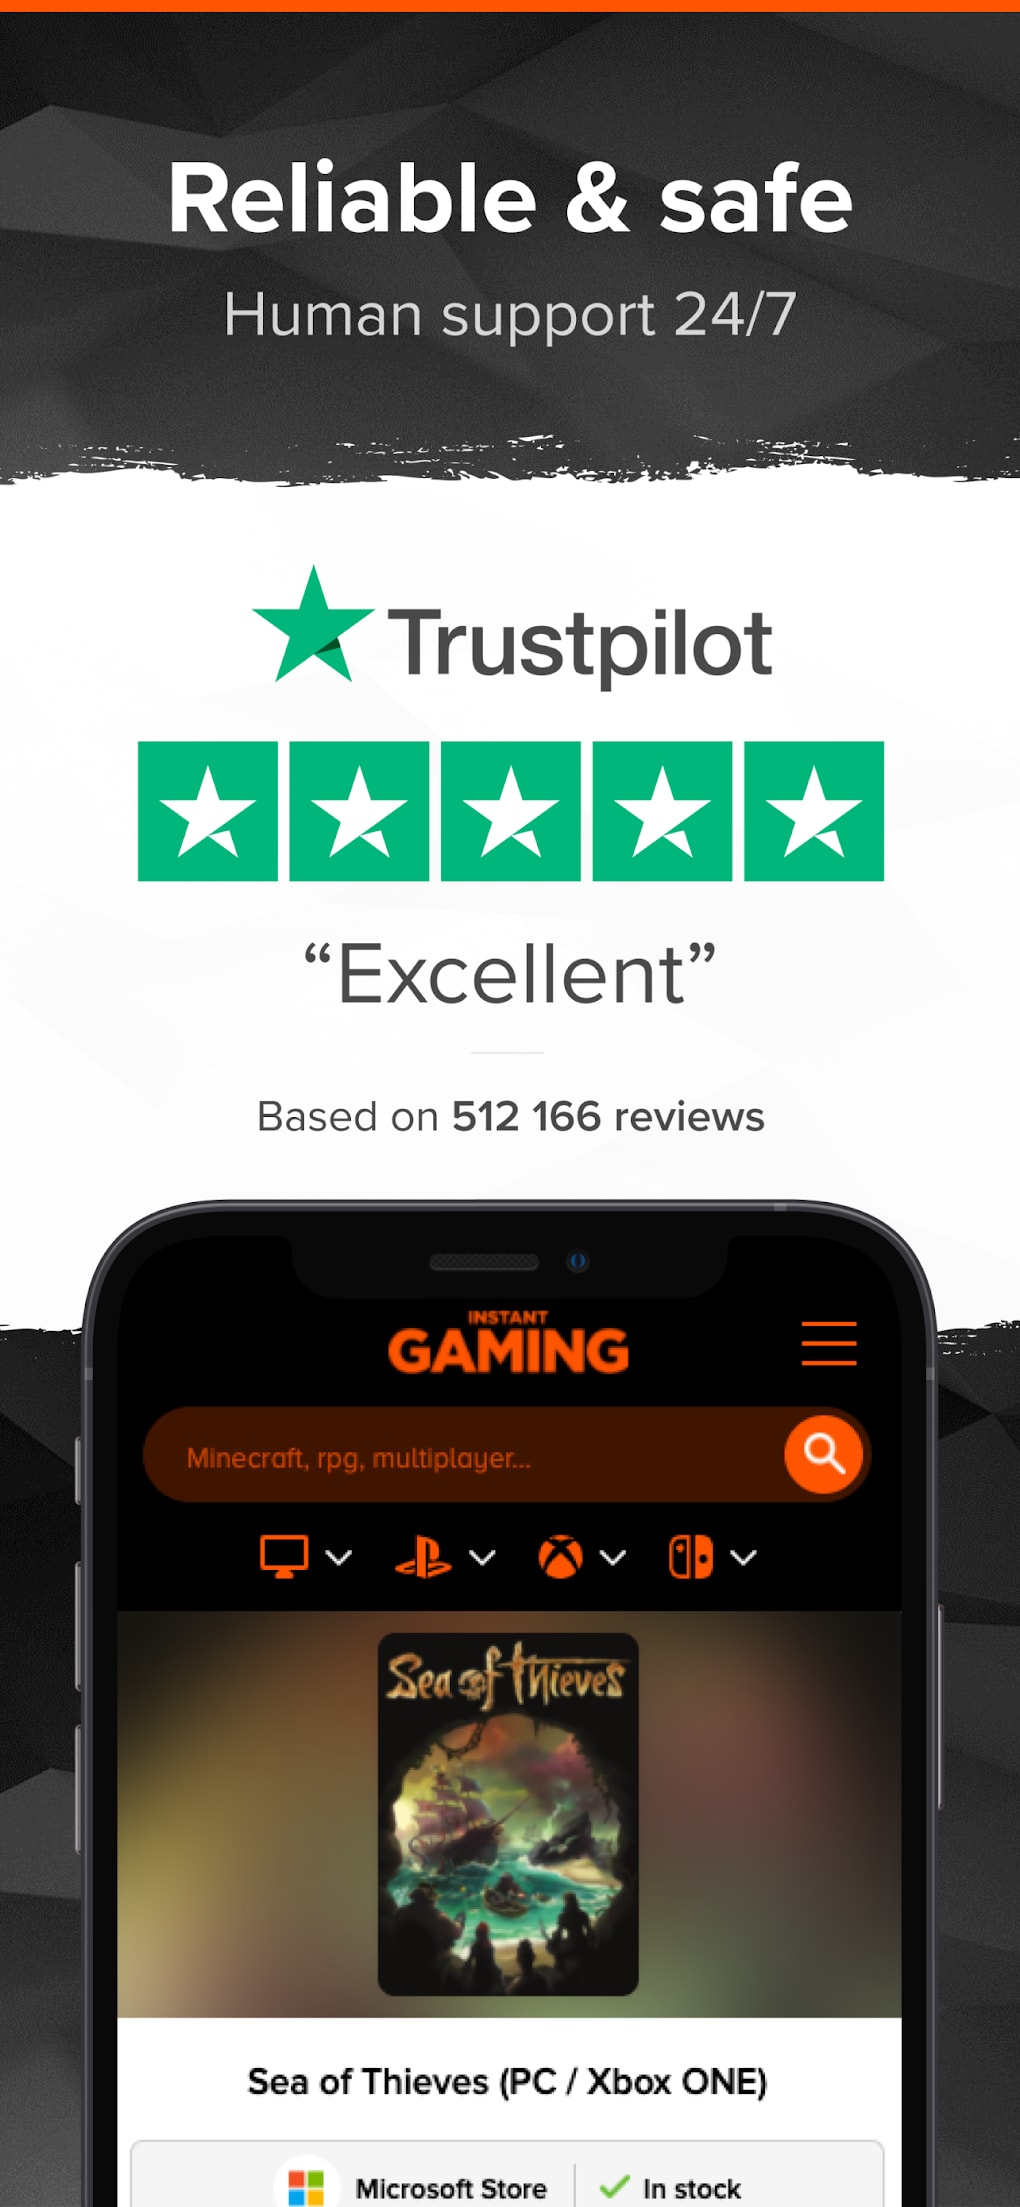 Instant Gaming Review - Is Instant Gaming Legit & Safe To Use?